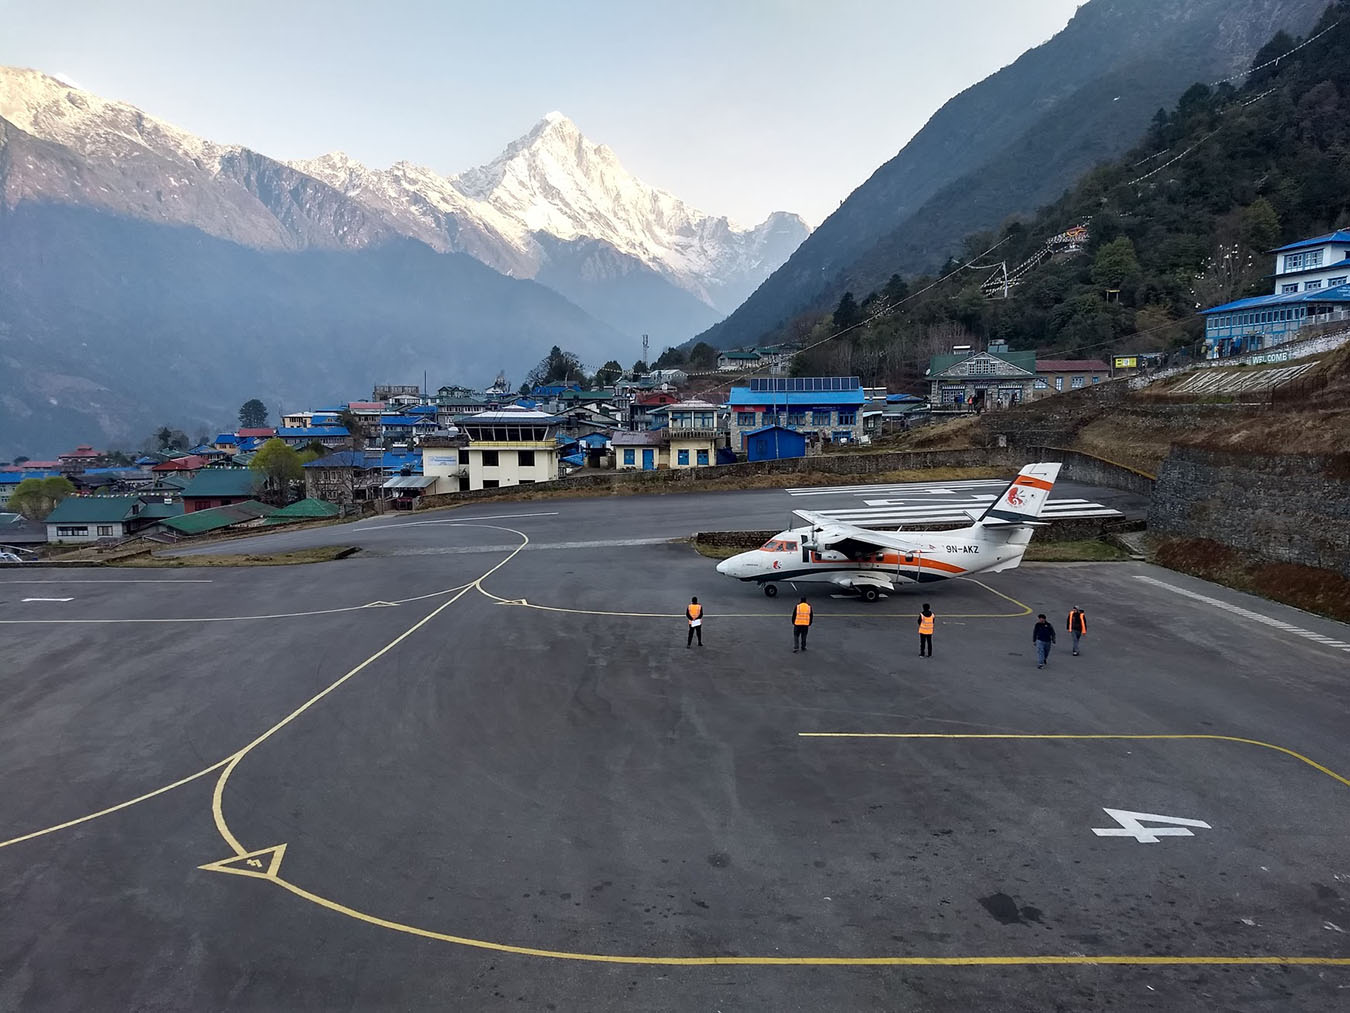 Tenzing Hillary Airport in Lukla, one of the many domestic airports in Nepal. Photo by Tina Harris.